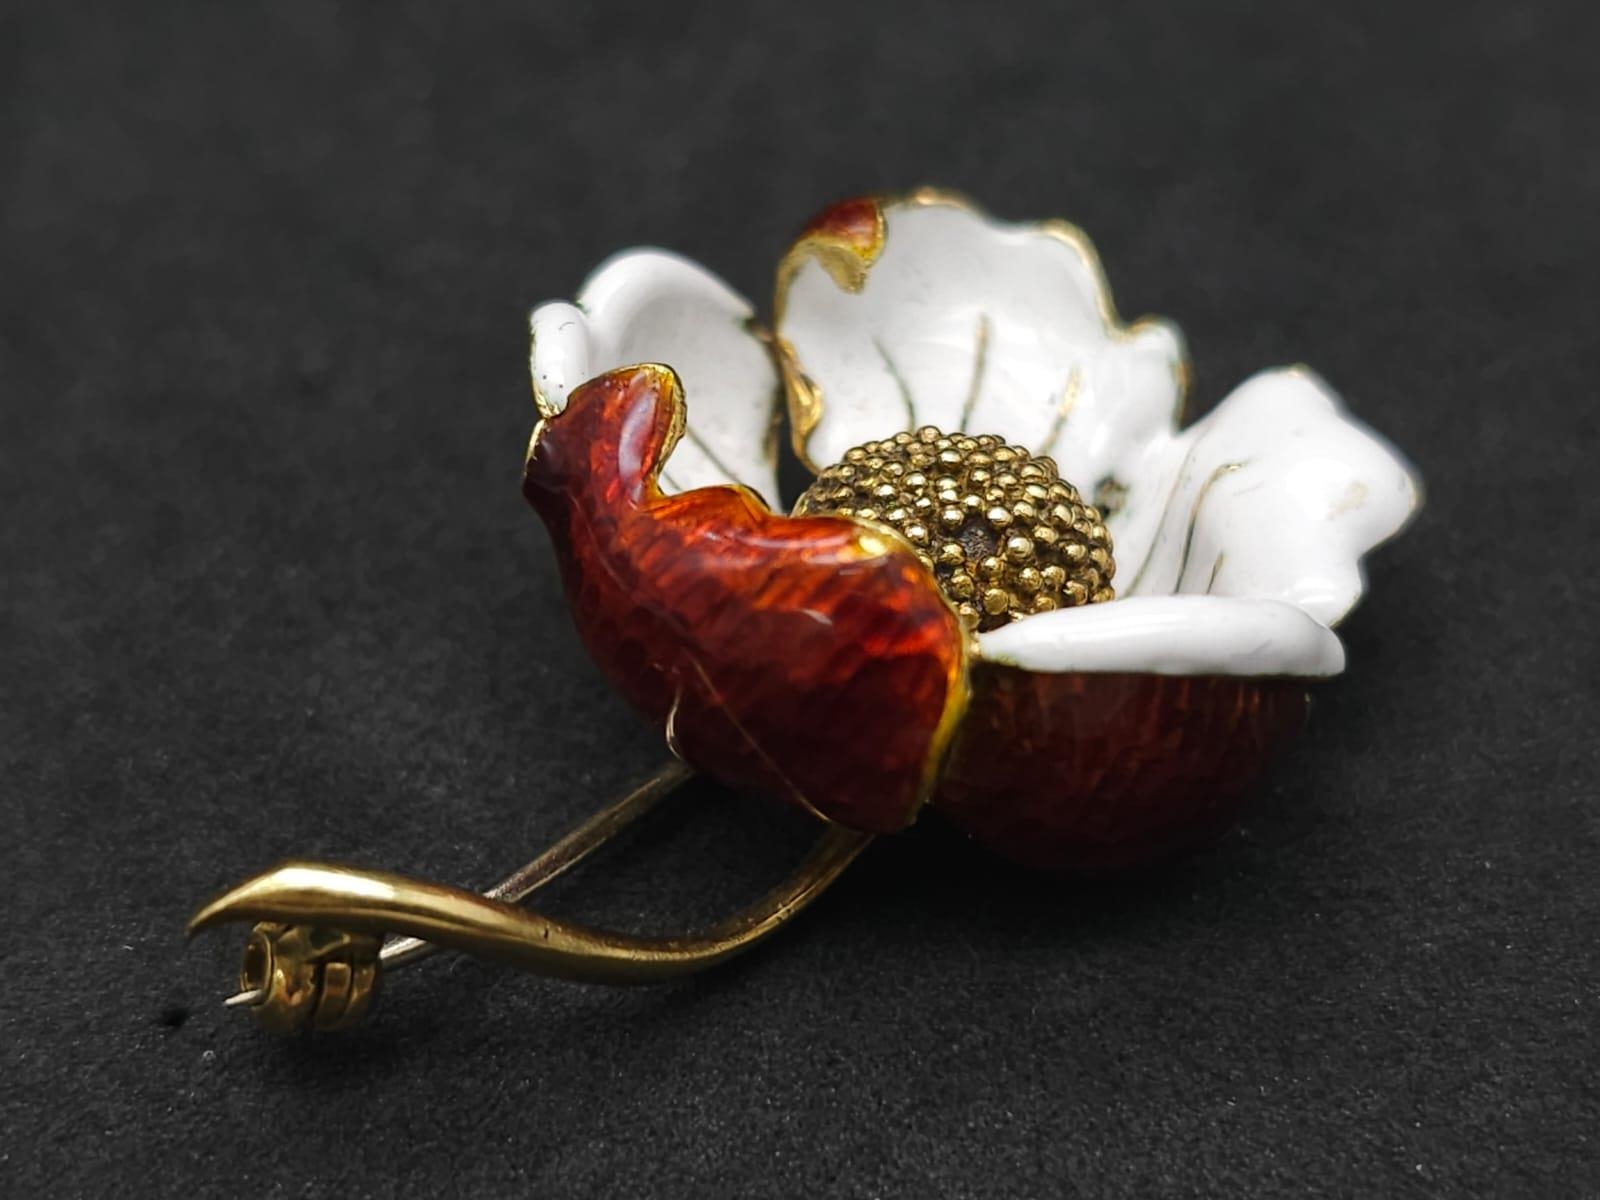 A Wonderful Vintage, Possibly Antique 18K Yellow Gold and Enamel Floral Brooch. Excellent inlaid - Image 4 of 11